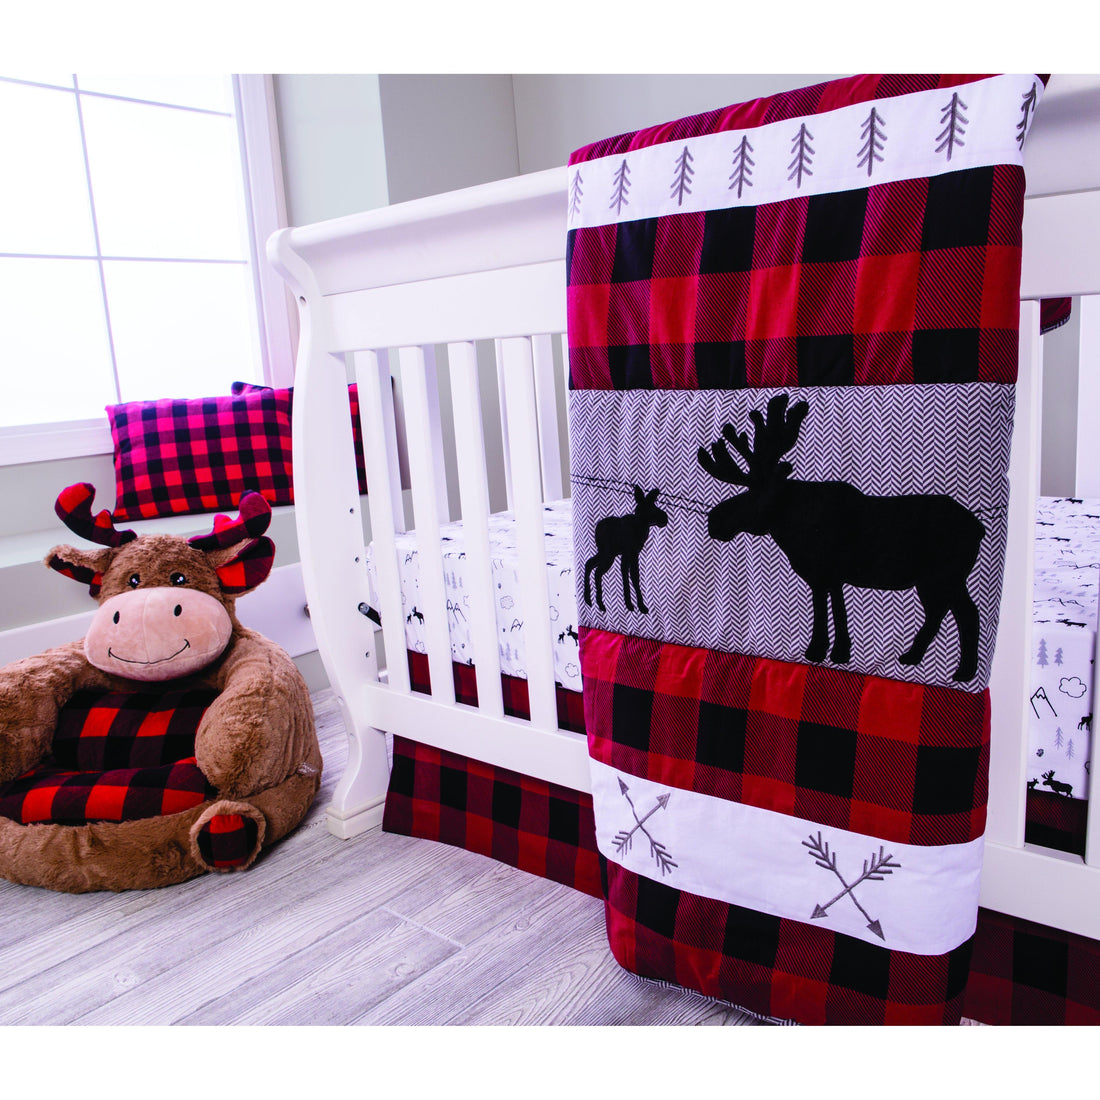 Trend Lab's Lumberjack Moose 3 Piece Bedding Featured in Baby Maternity Retail Magazine - Trend Lab